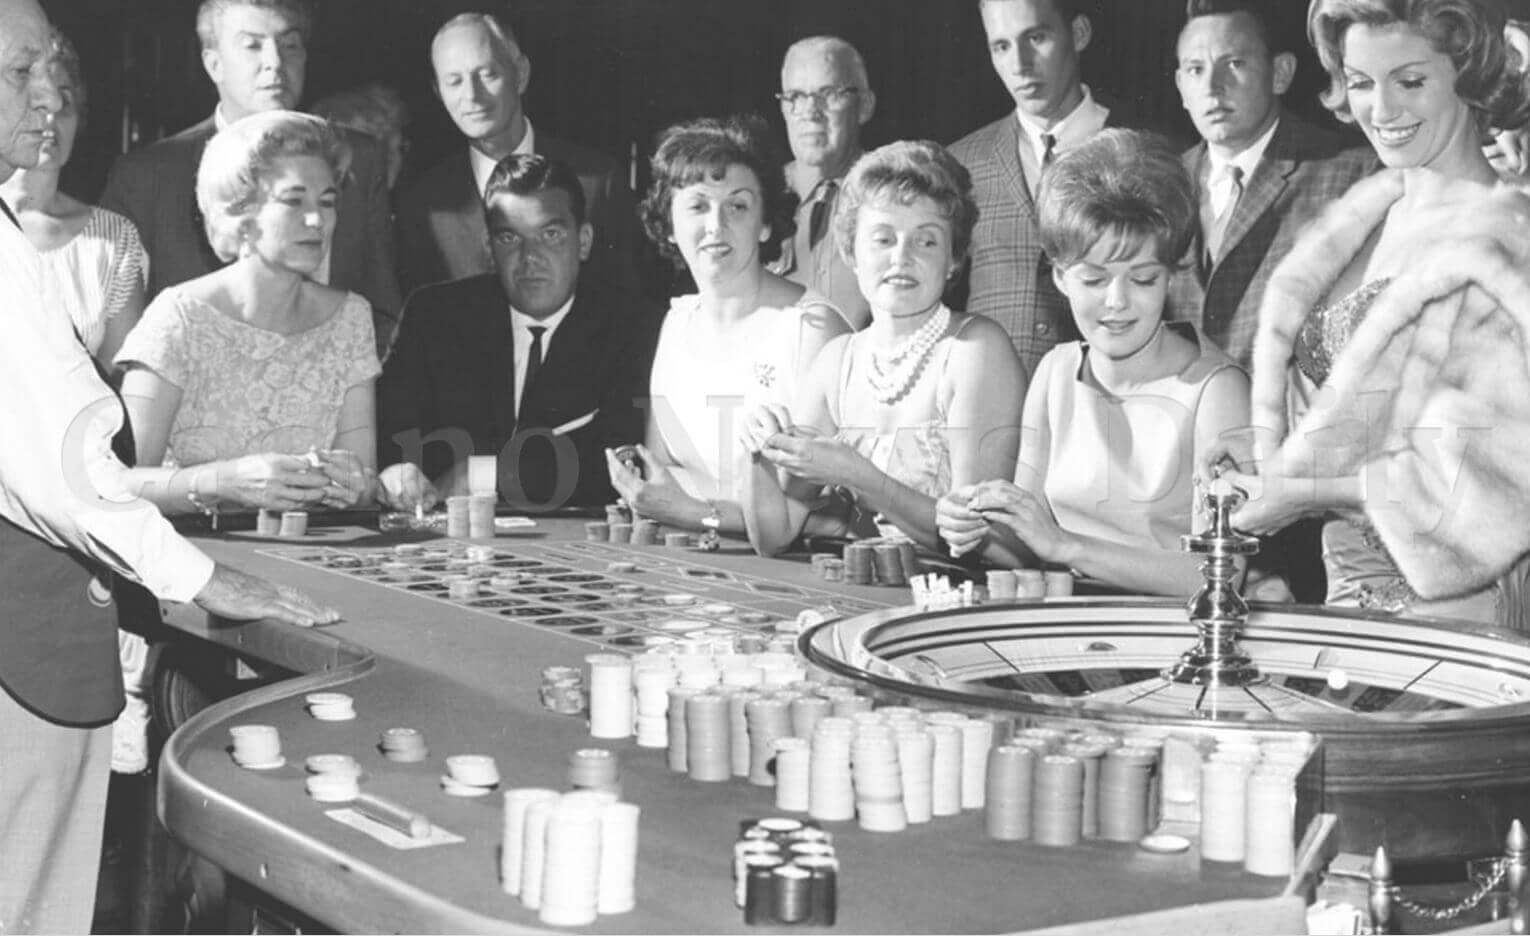 Table Games - A Brief History